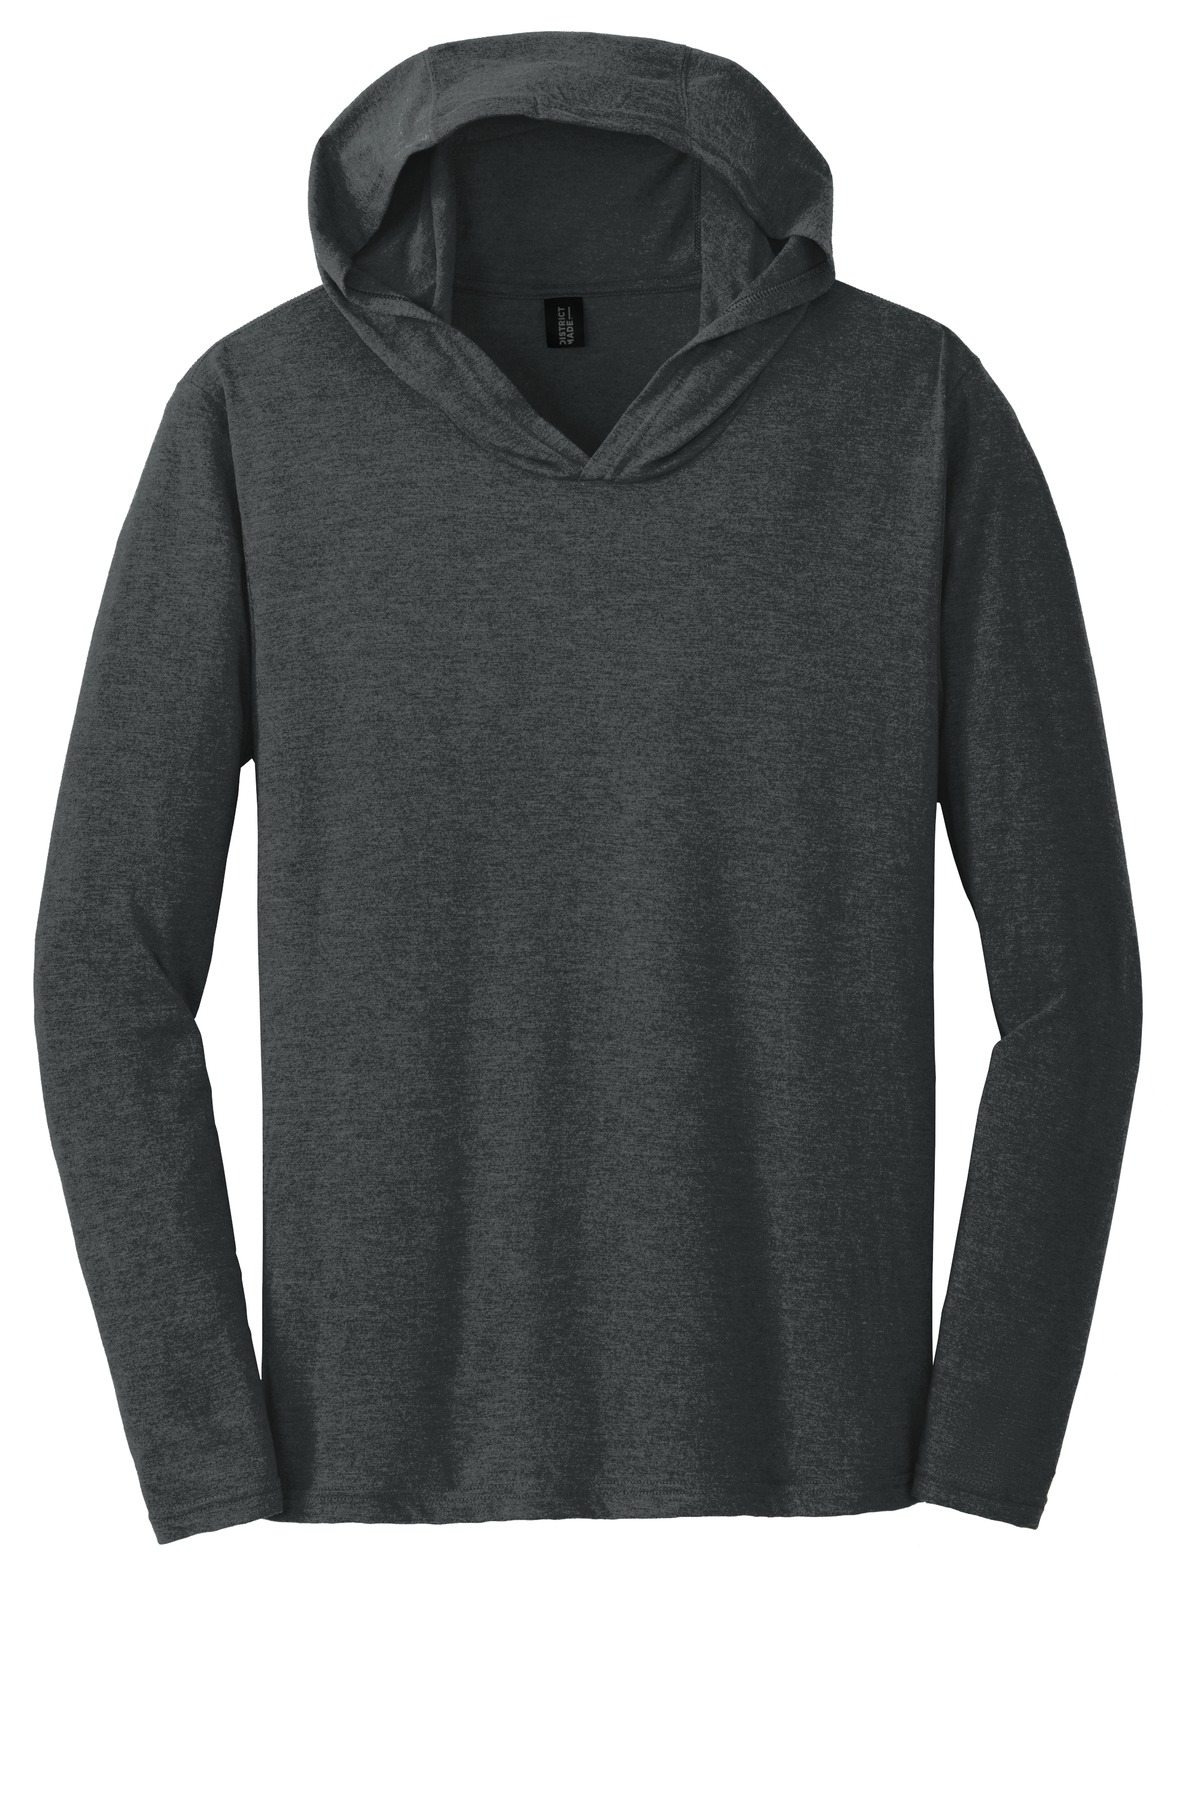 District Made Mens Perfect Tri Long Sleeve Hoodie-S (Black Frost) - image 5 of 6